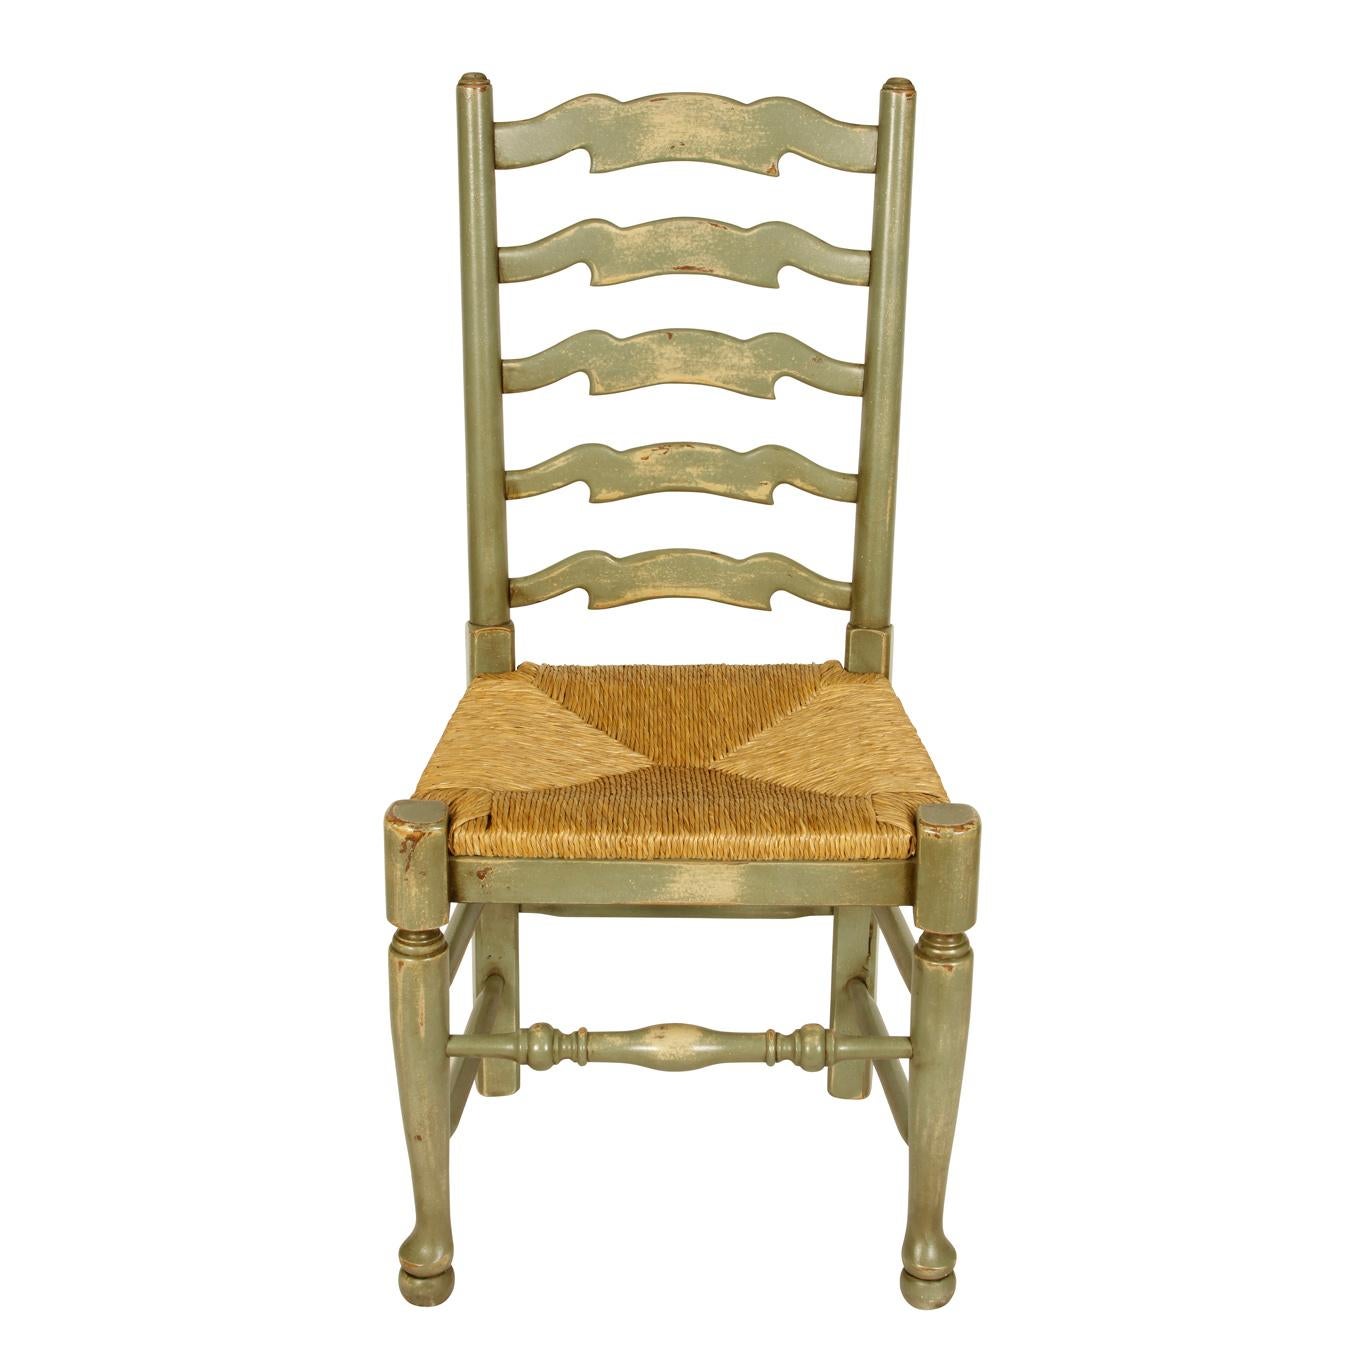 A set of ladder-back dining chairs painted in a washed celadon green with rush seats and turned legs.